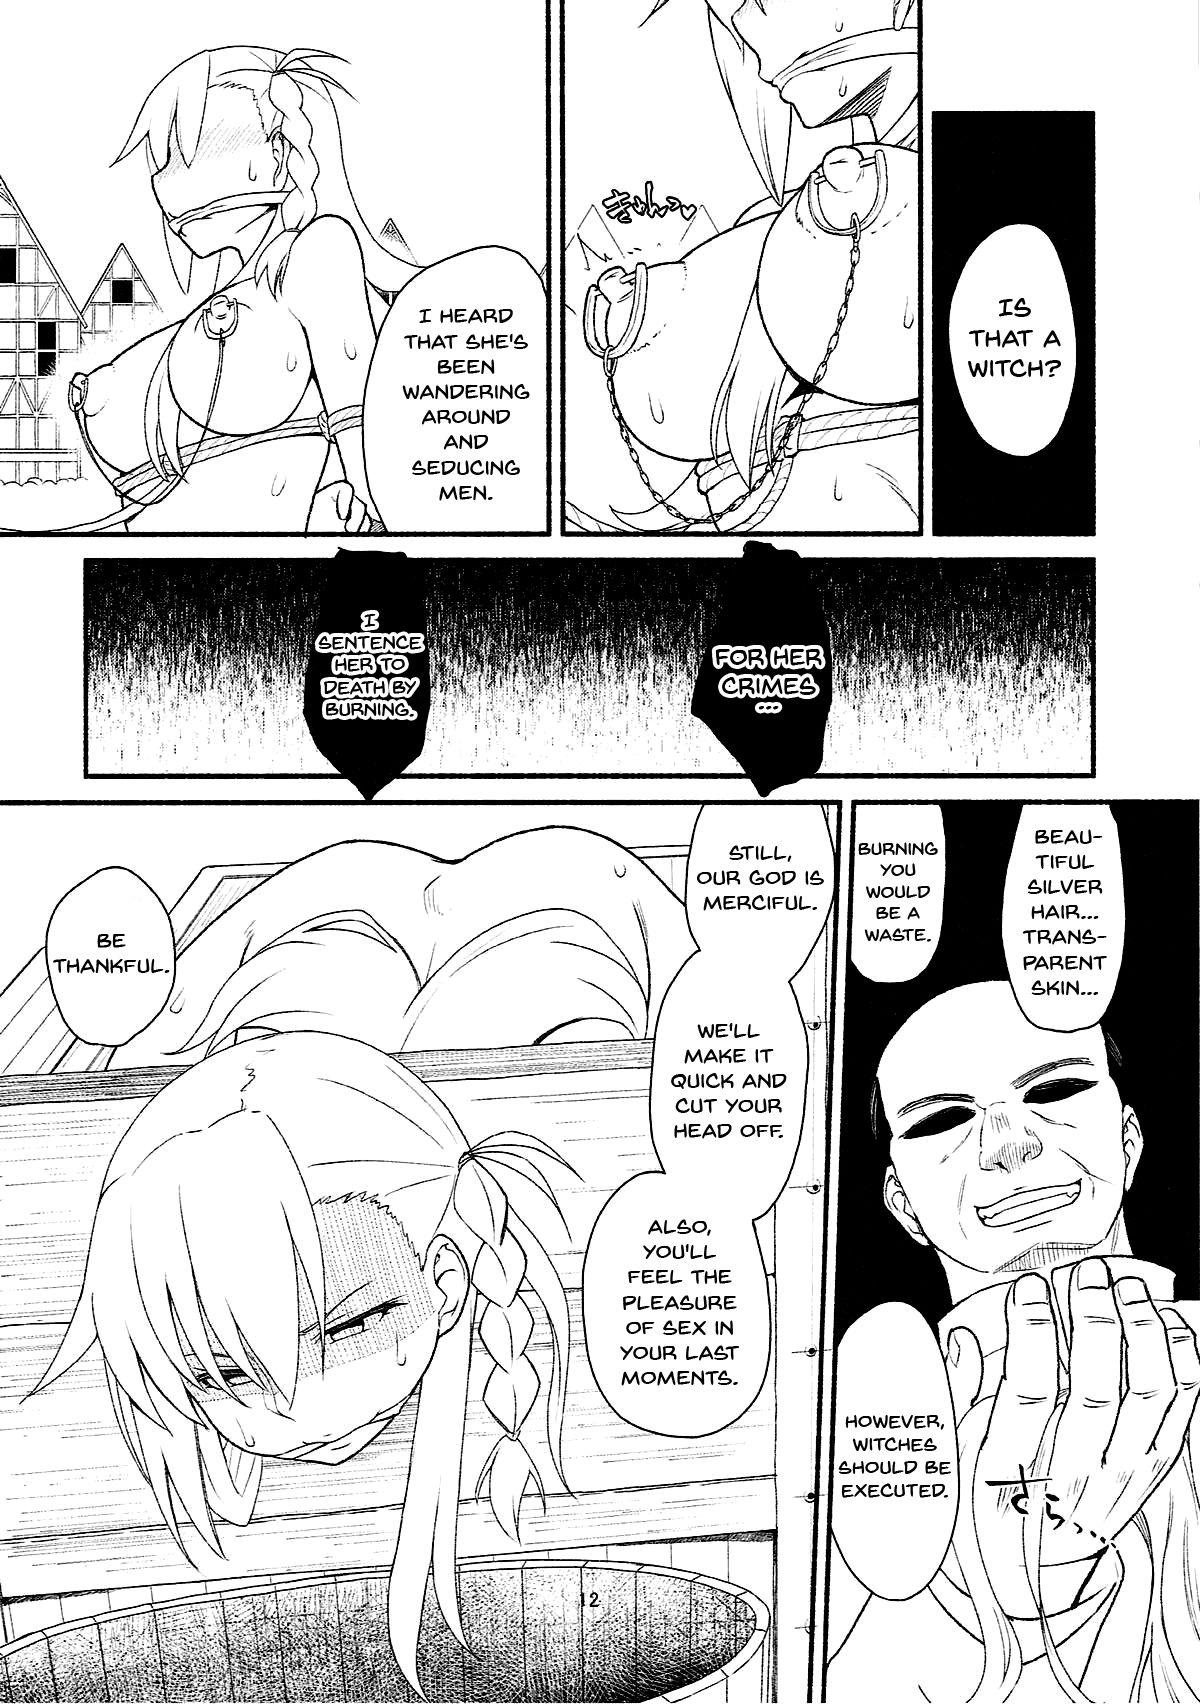 Hot Girl Fuck RE:INCARNATION - Fate grand order Neighbor - Page 11